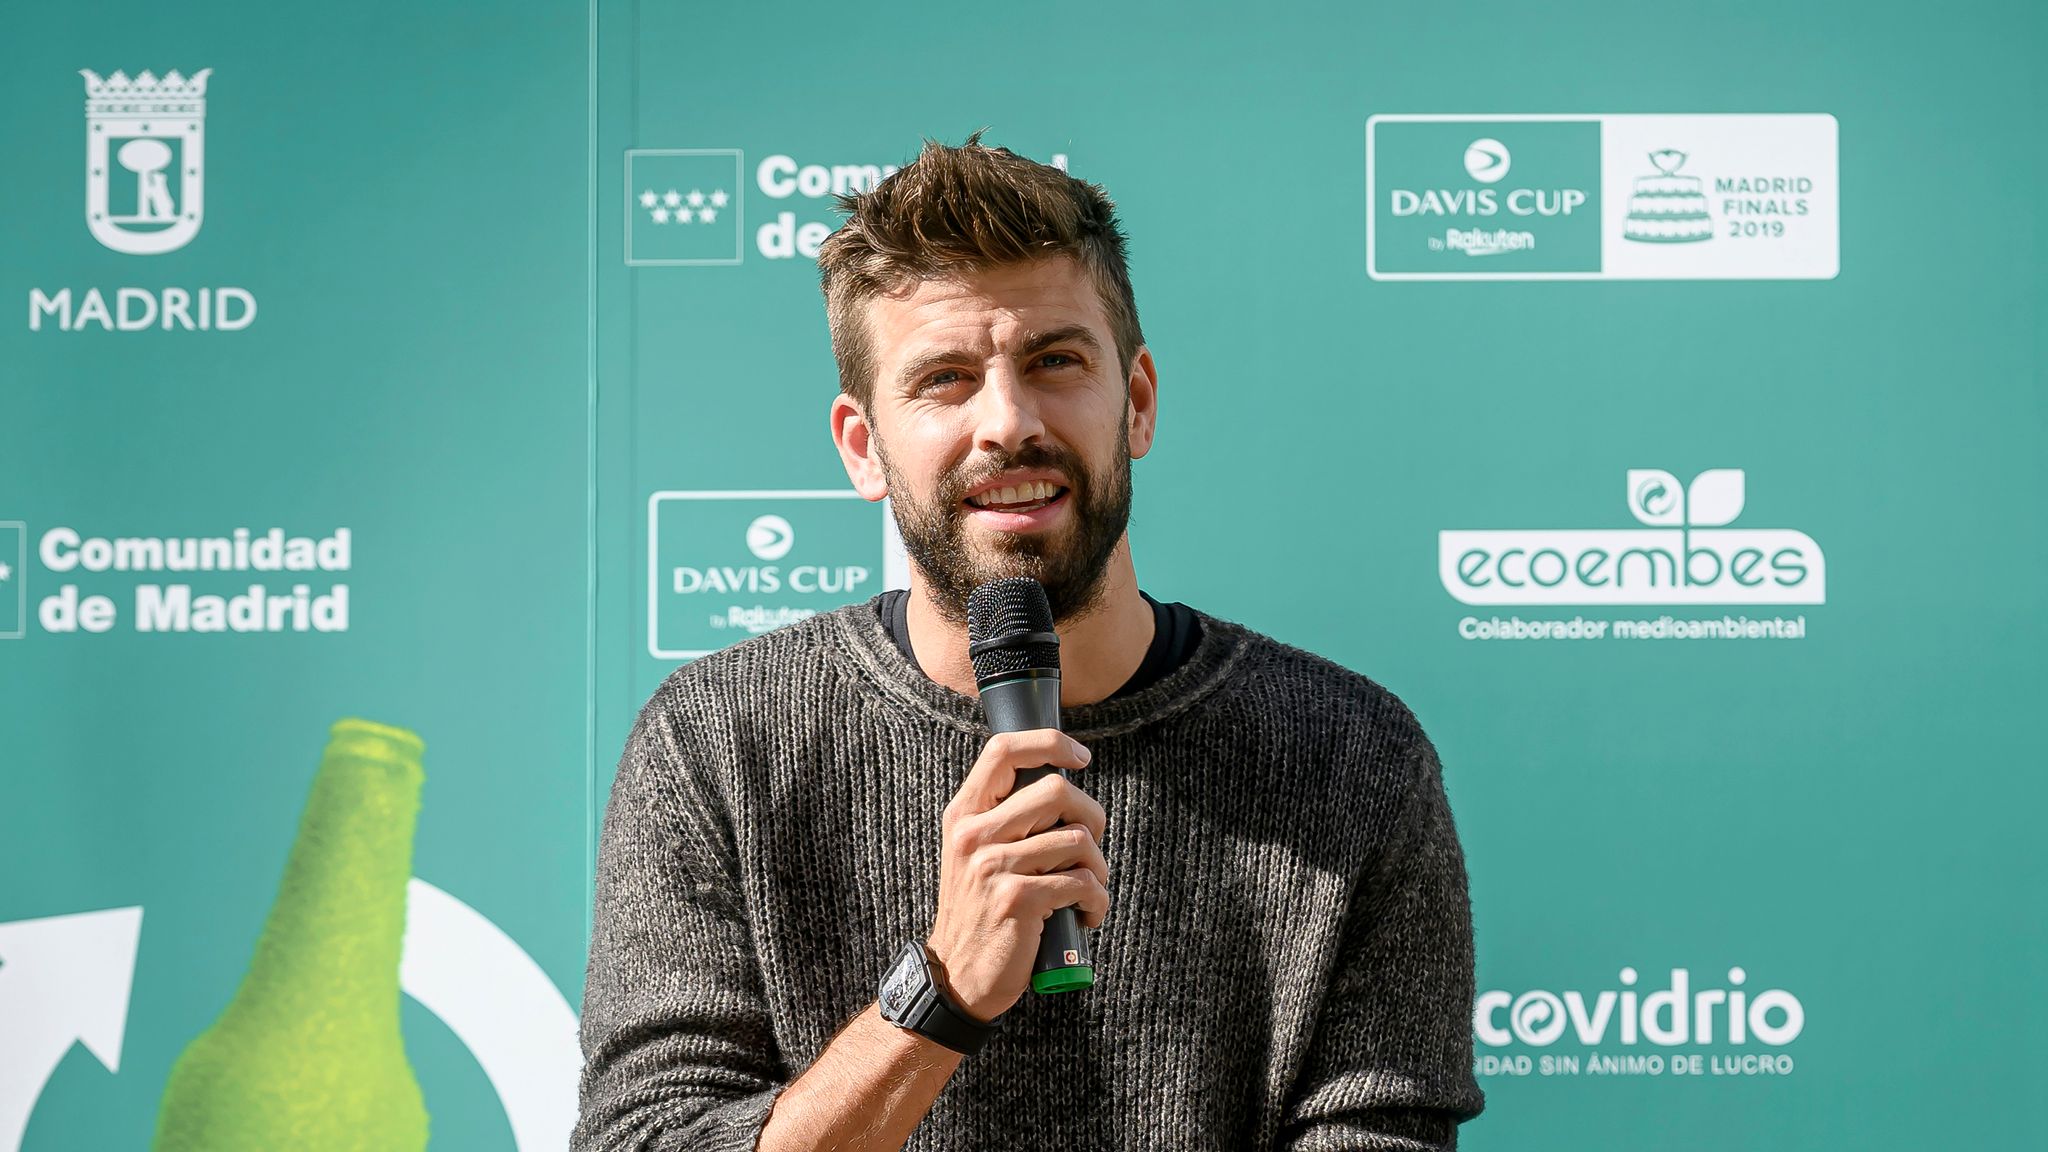 Davis Cup Finals Gerard Pique pessimistic over 2020 staging in Madrid Tennis News Sky Sports